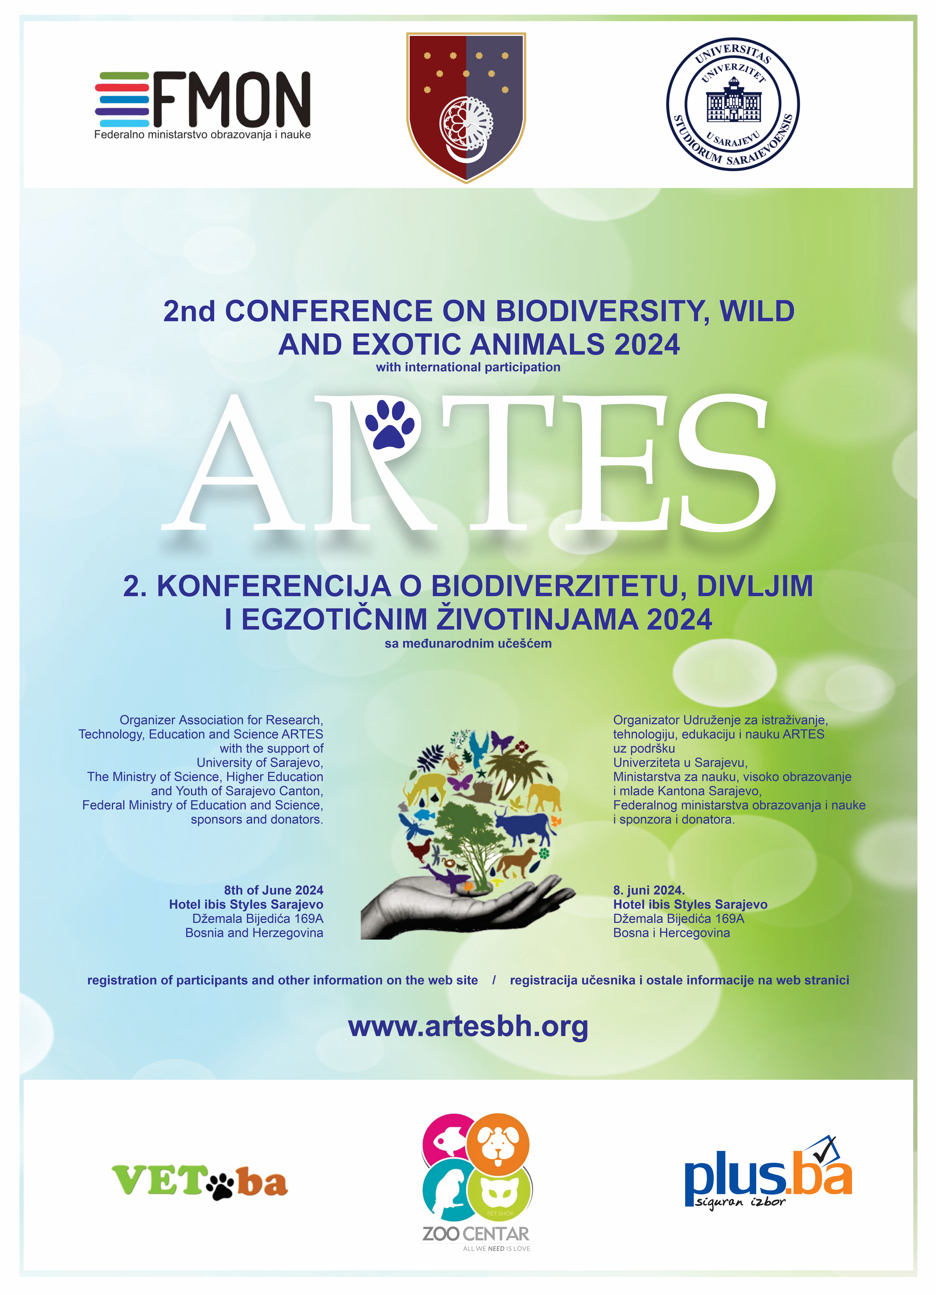 Conference on Biodiversity, Wild and Exotic Animals 2024 – ARTES